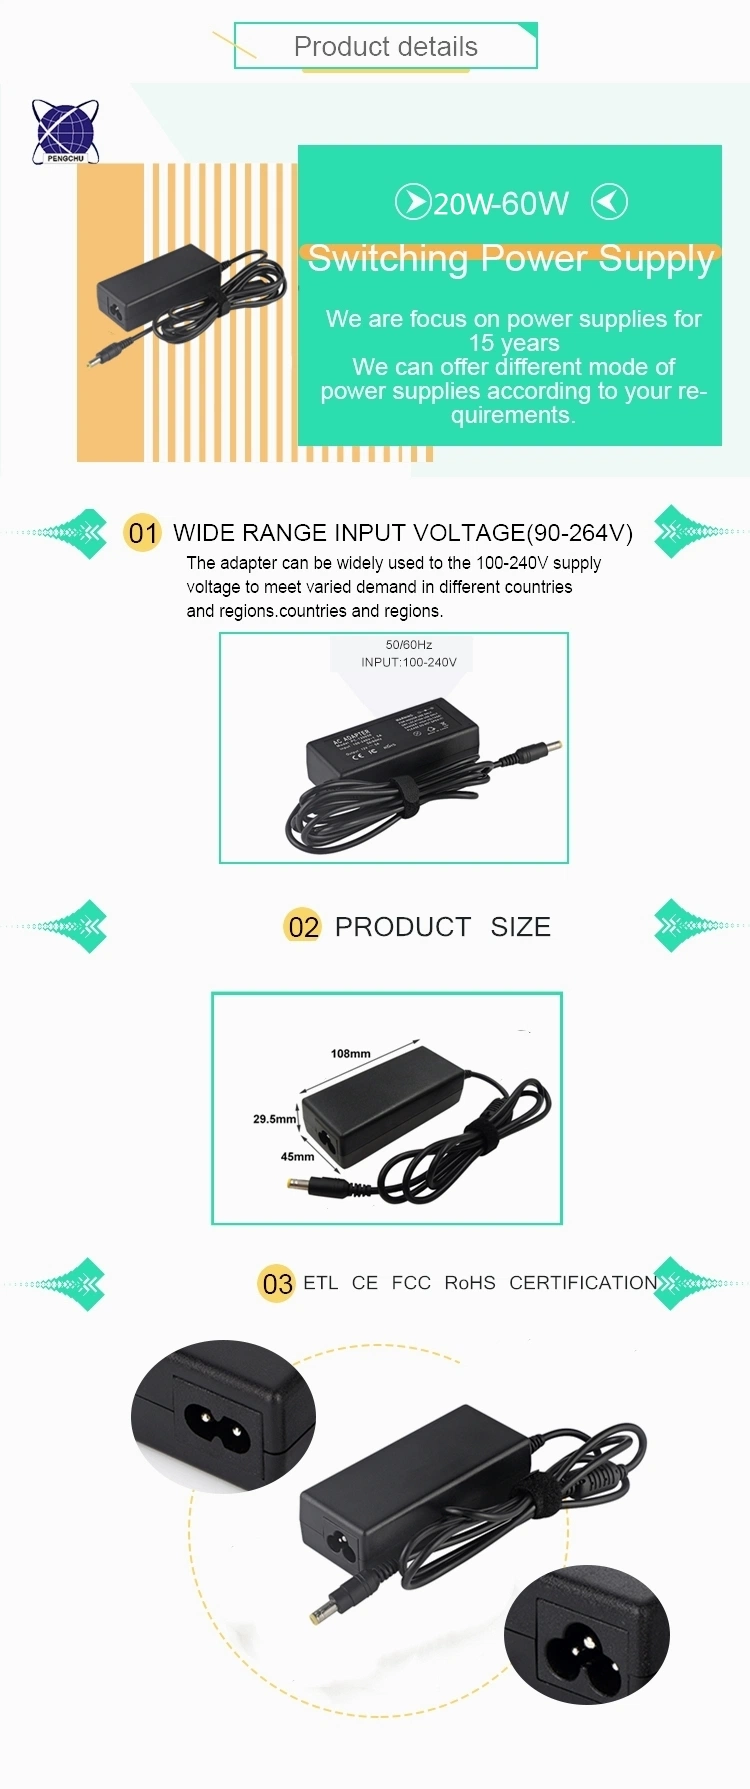 12V 5Amp Power Supply Adapter, AC 100-240V to DC 12Vdc 5A 3.5A 3A 2A 1A Replacement Power Cord Converter for DVD Record Player CCTV Christmas Village Decoration